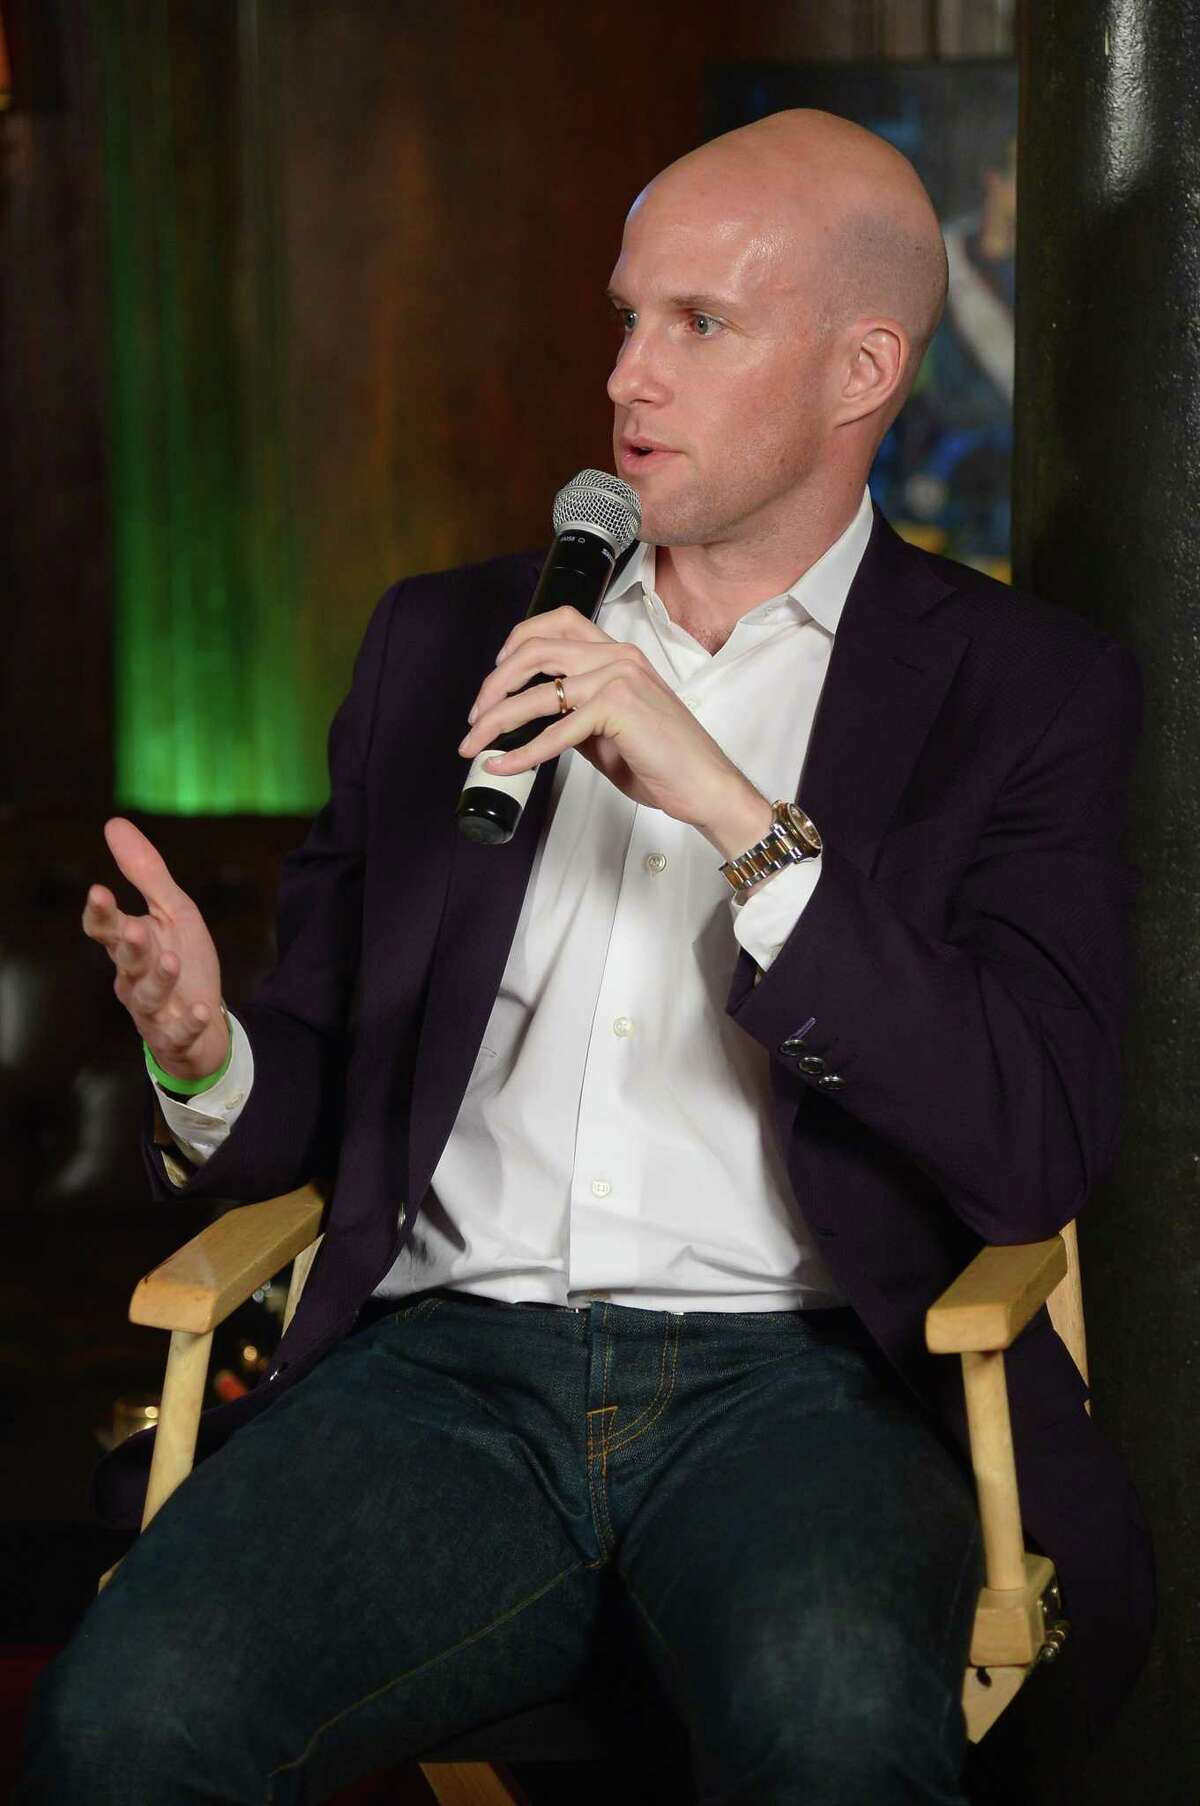 In this photo from April 8, 2014, Sports Illustrated's Grant Wahl speaks on a panel discussion at the 2014 Kicking + Screening Soccer Film Festival New York, presented by Budweiser in New York City. (Michael Loccisano/Getty Images for Budweiser/TNS)